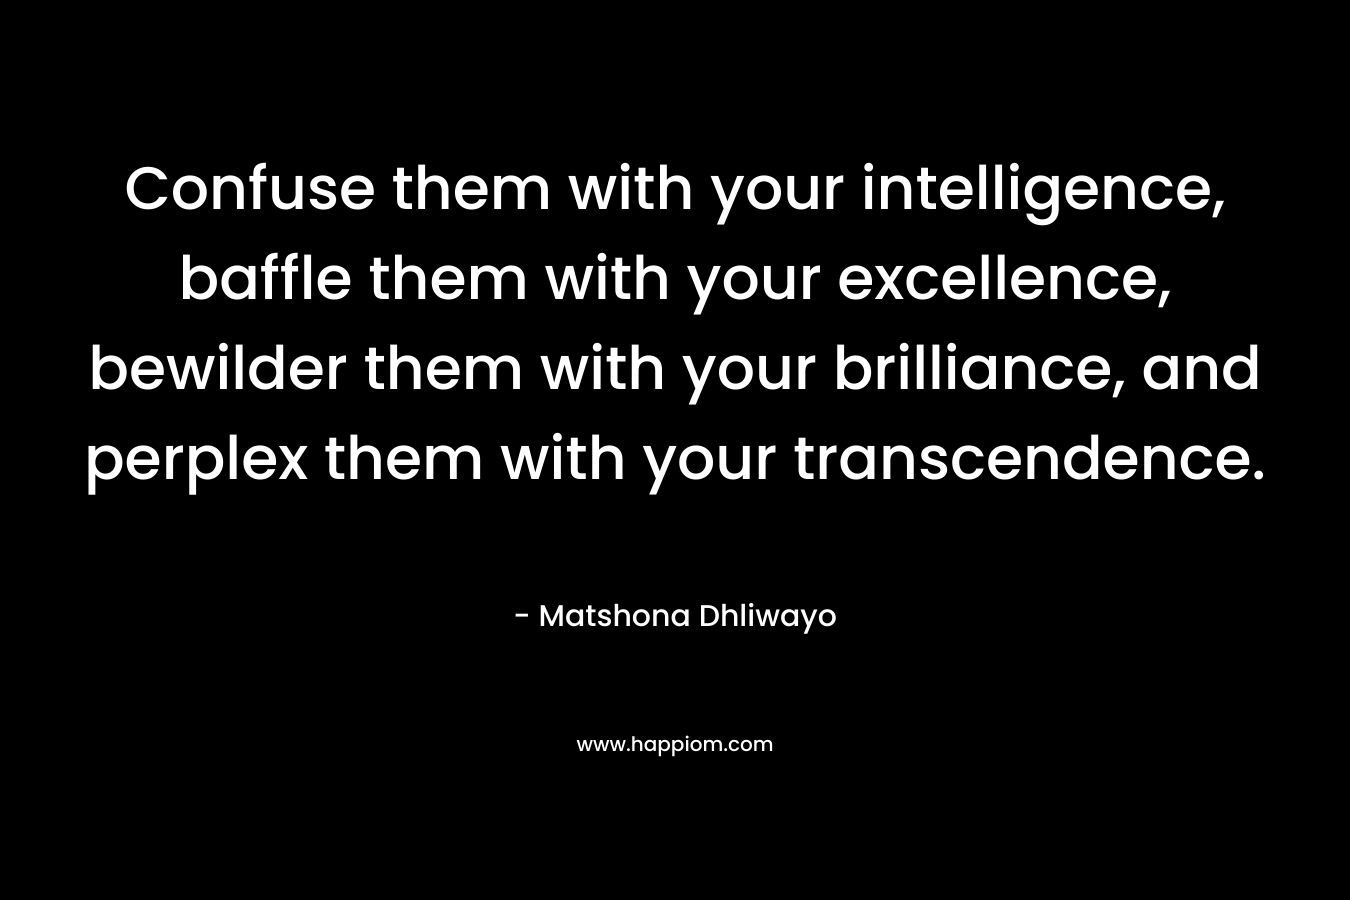 Confuse them with your intelligence, baffle them with your excellence, bewilder them with your brilliance, and perplex them with your transcendence.